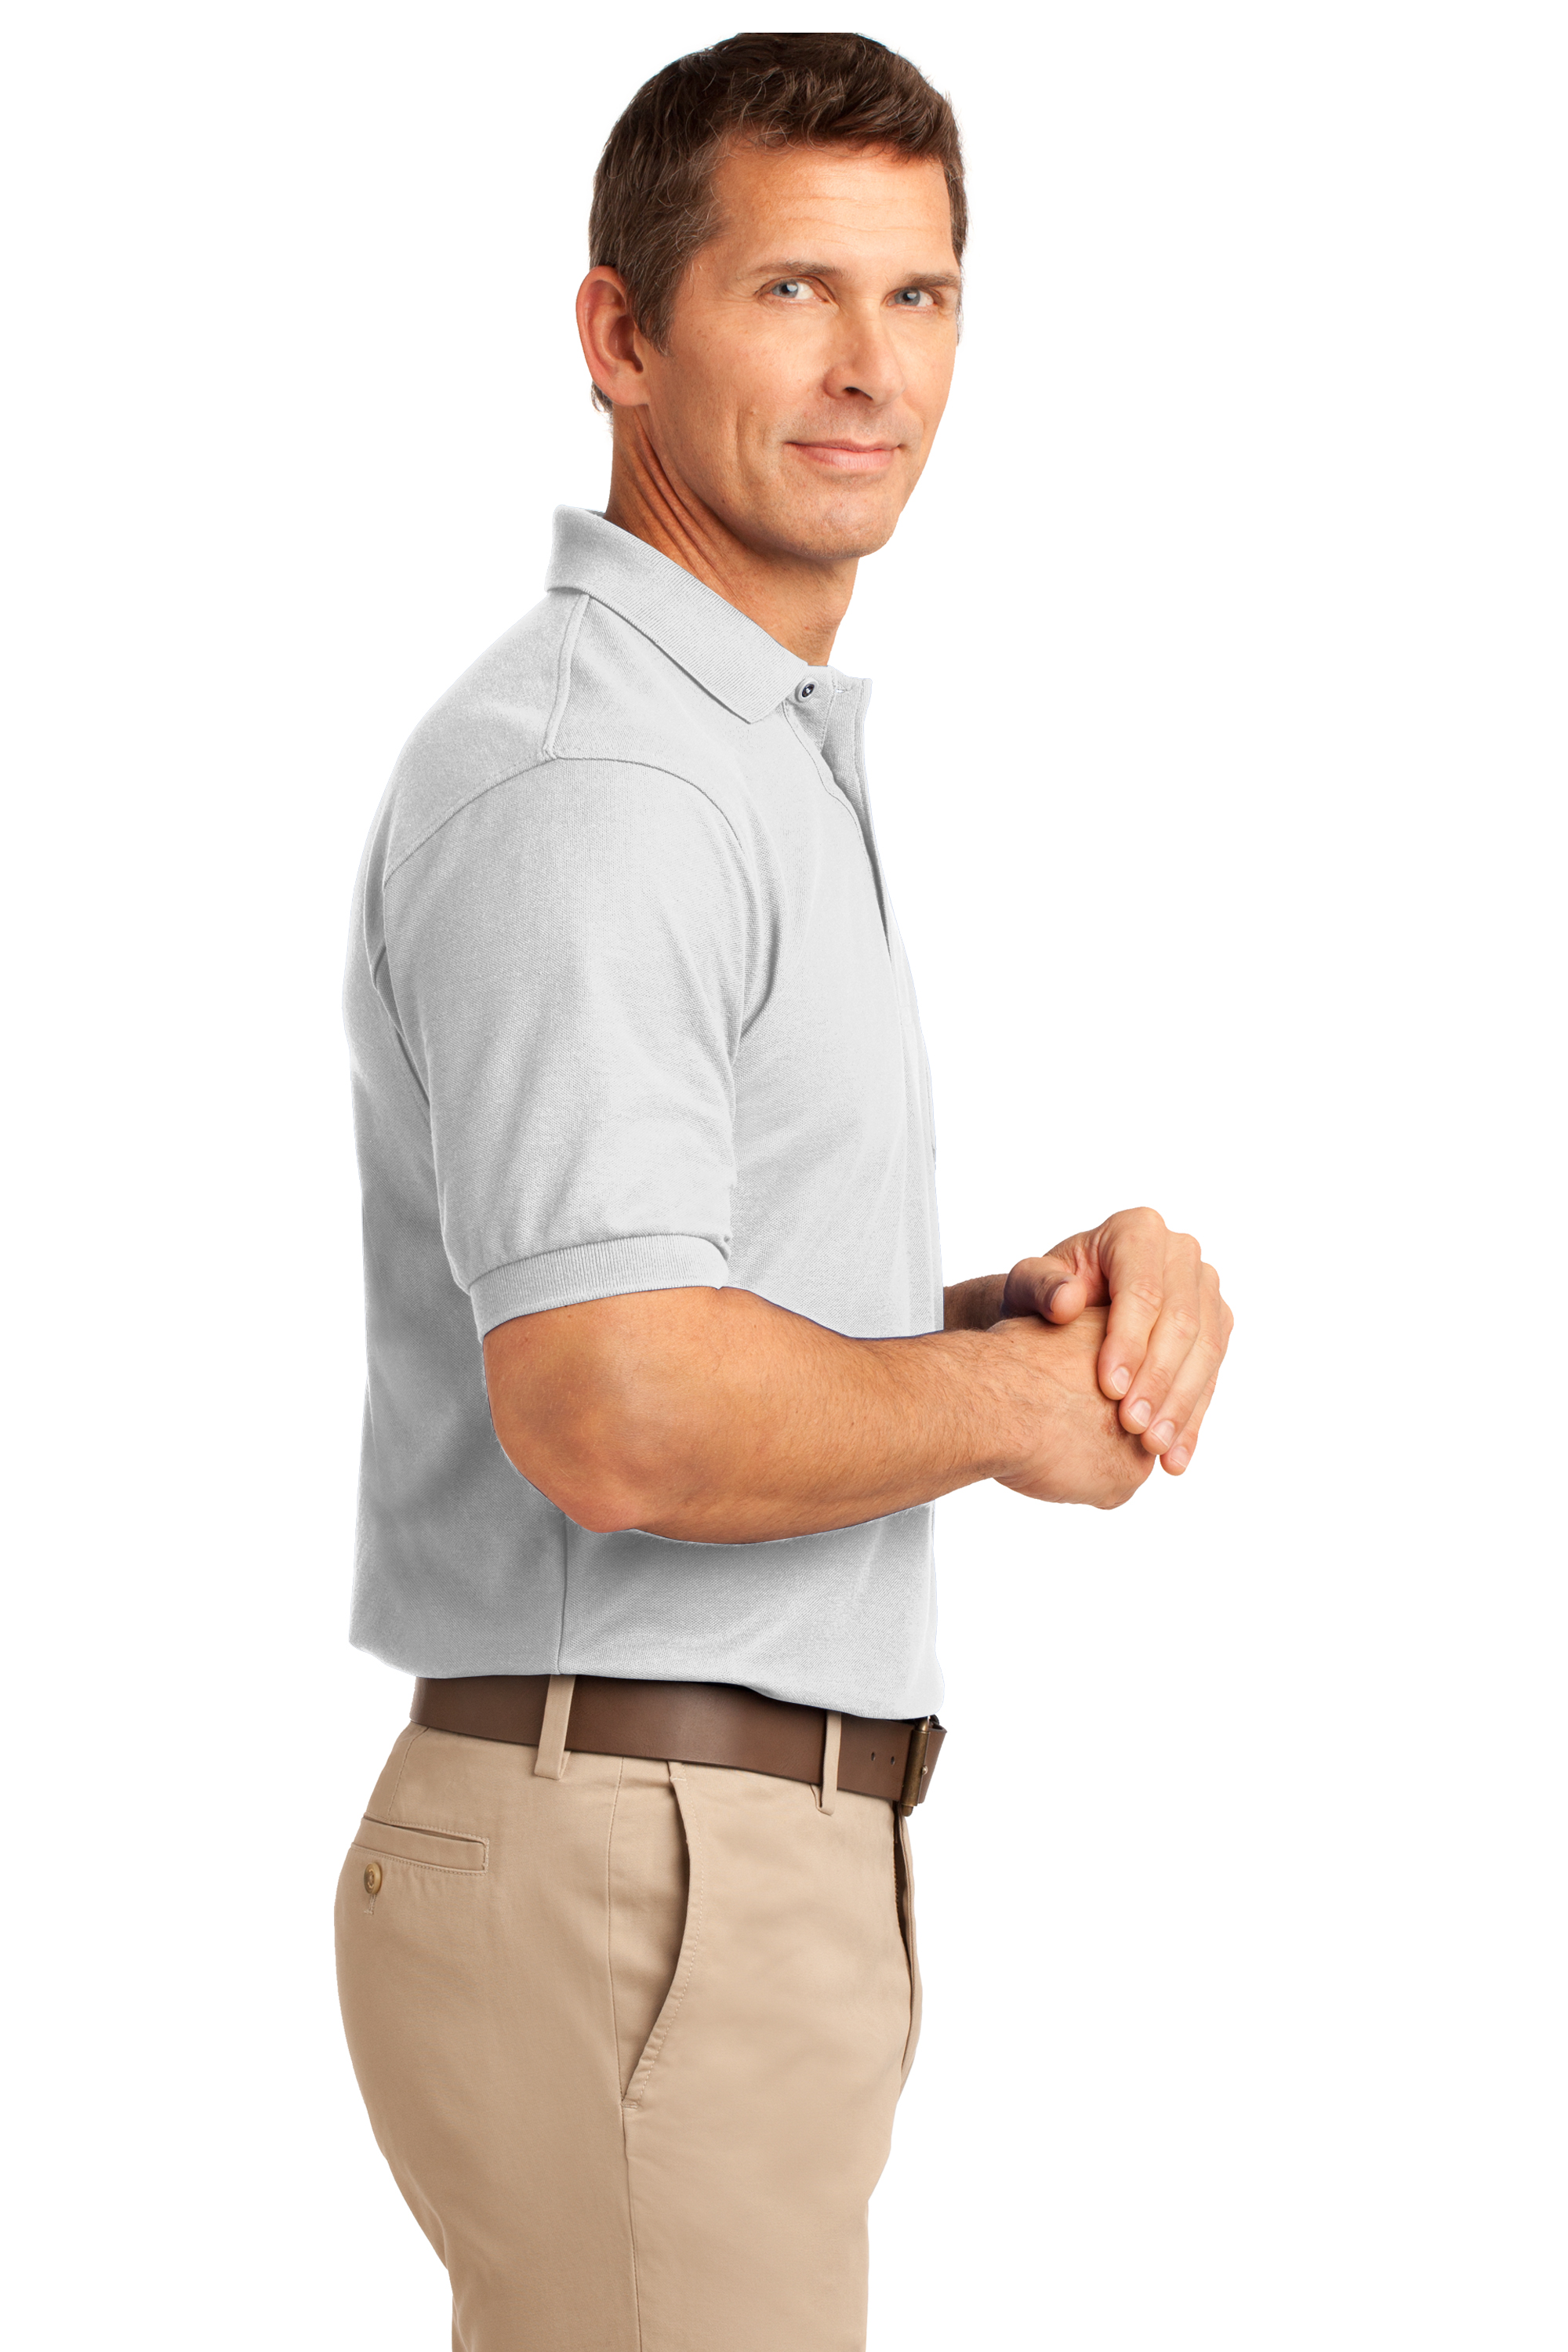 Port Authority Silk Touch Polo with Pocket K500P - Model Image